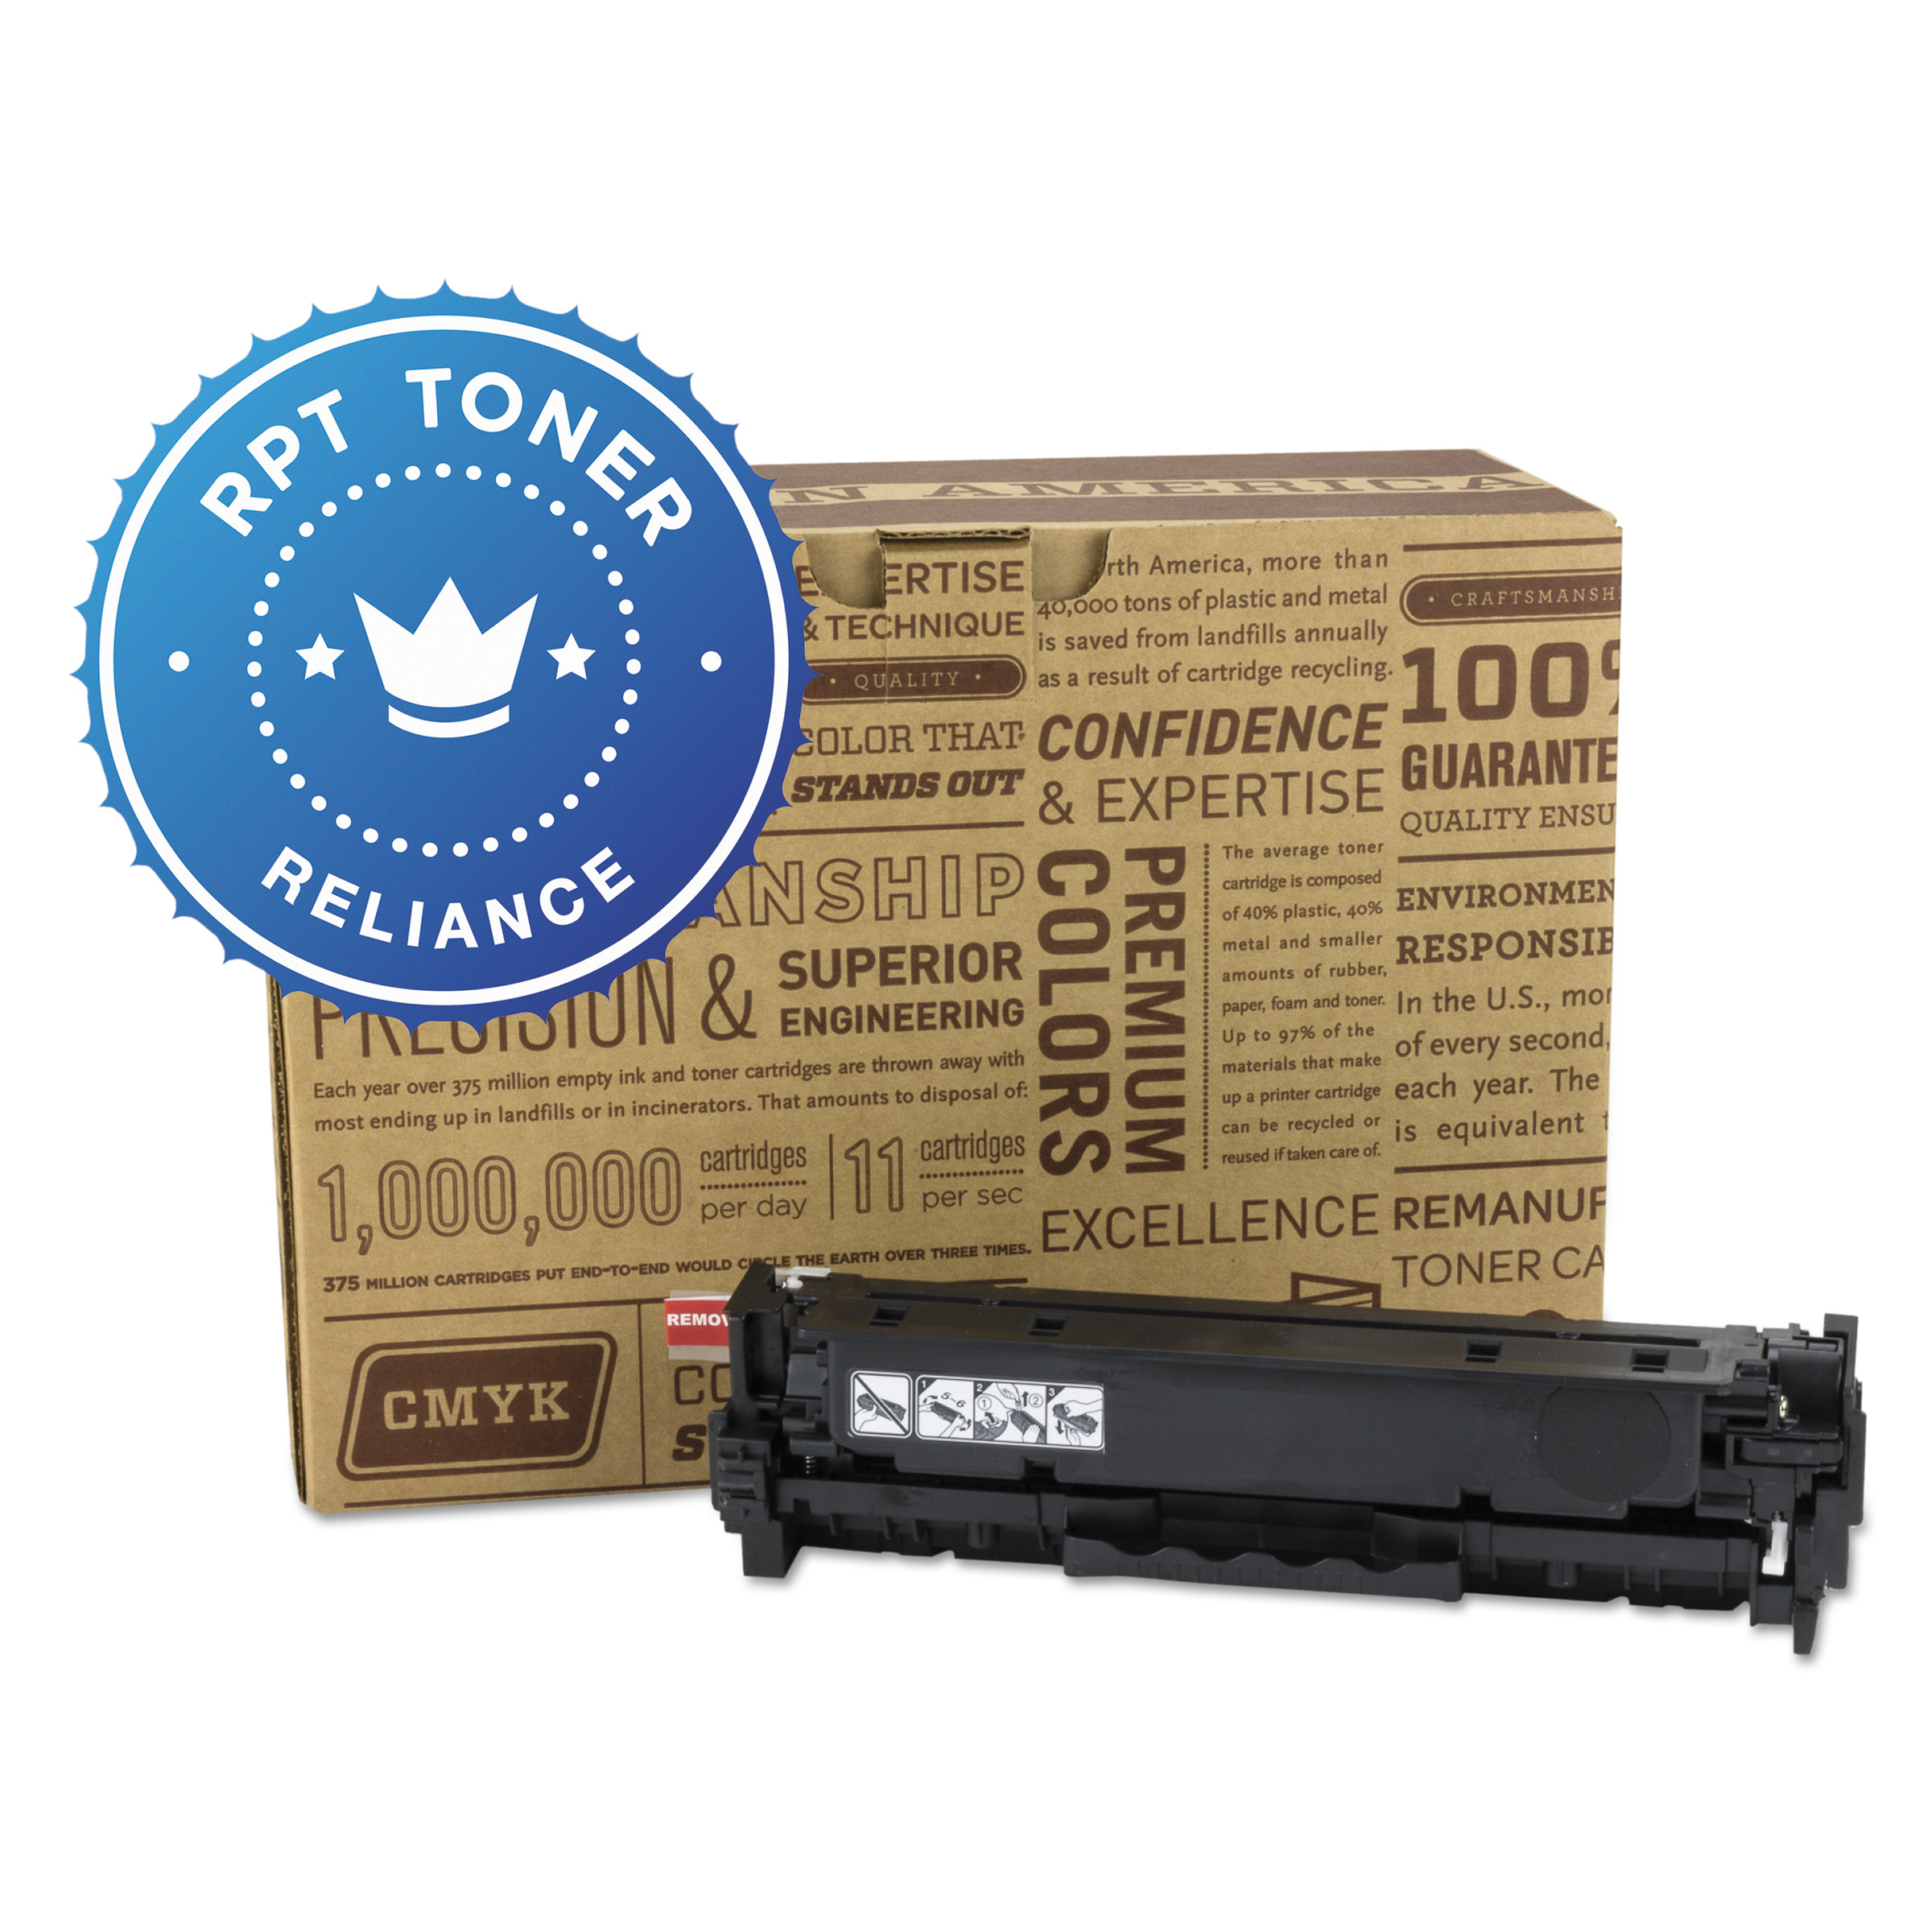 Reliance Remanufactured CE411A (305A) Toner, Cyan - image 1 of 1